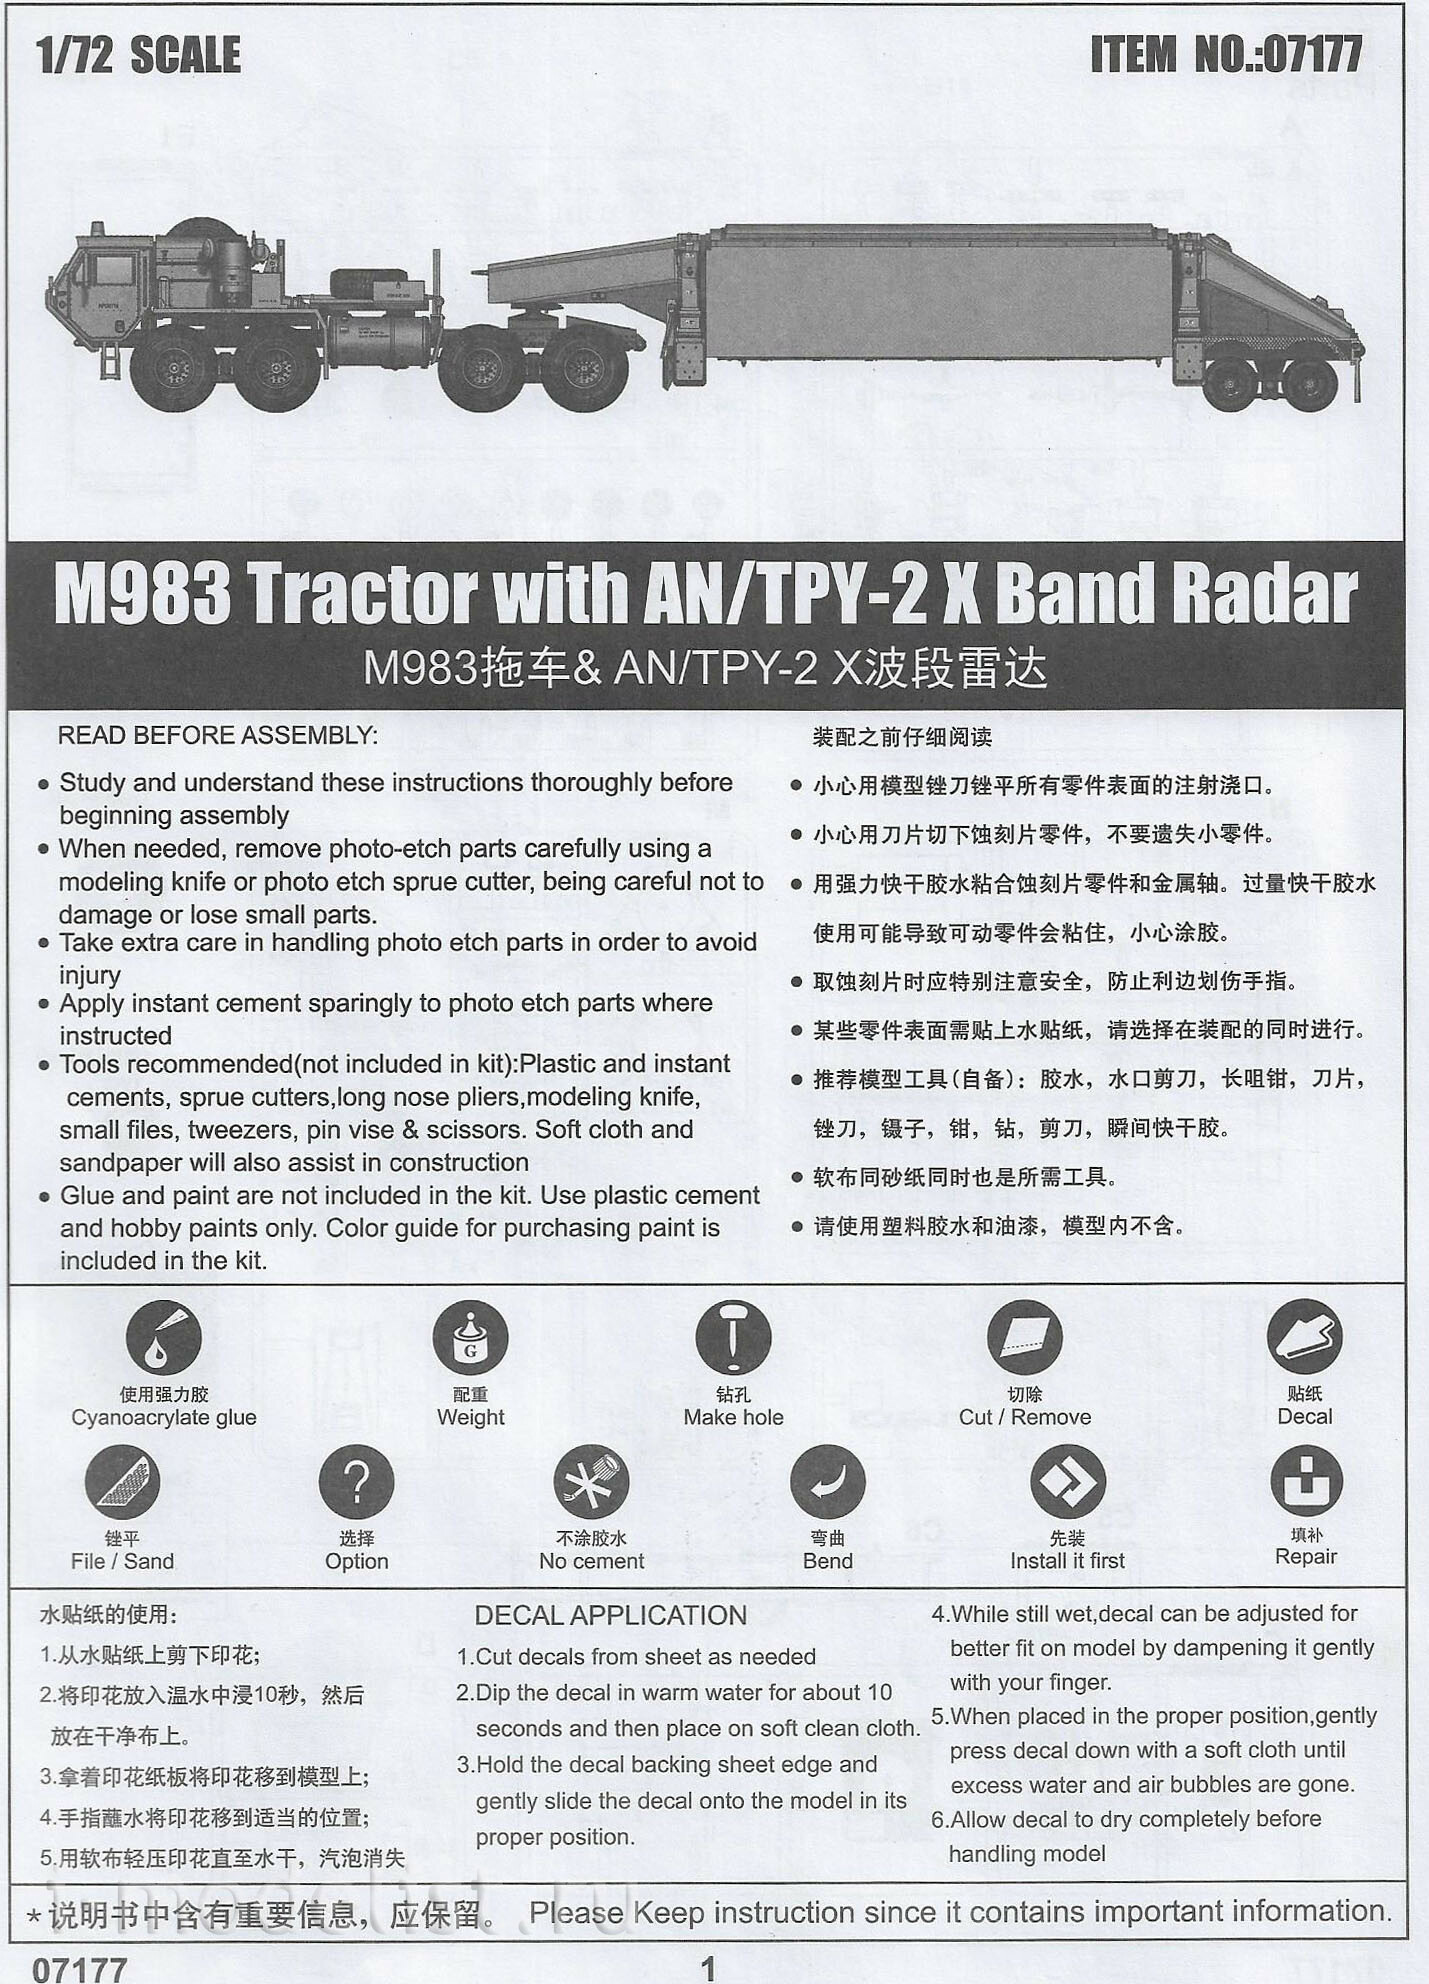 07177 Trumpeter 1/72 Tractor M983 with X-band radar AN/TPY-2